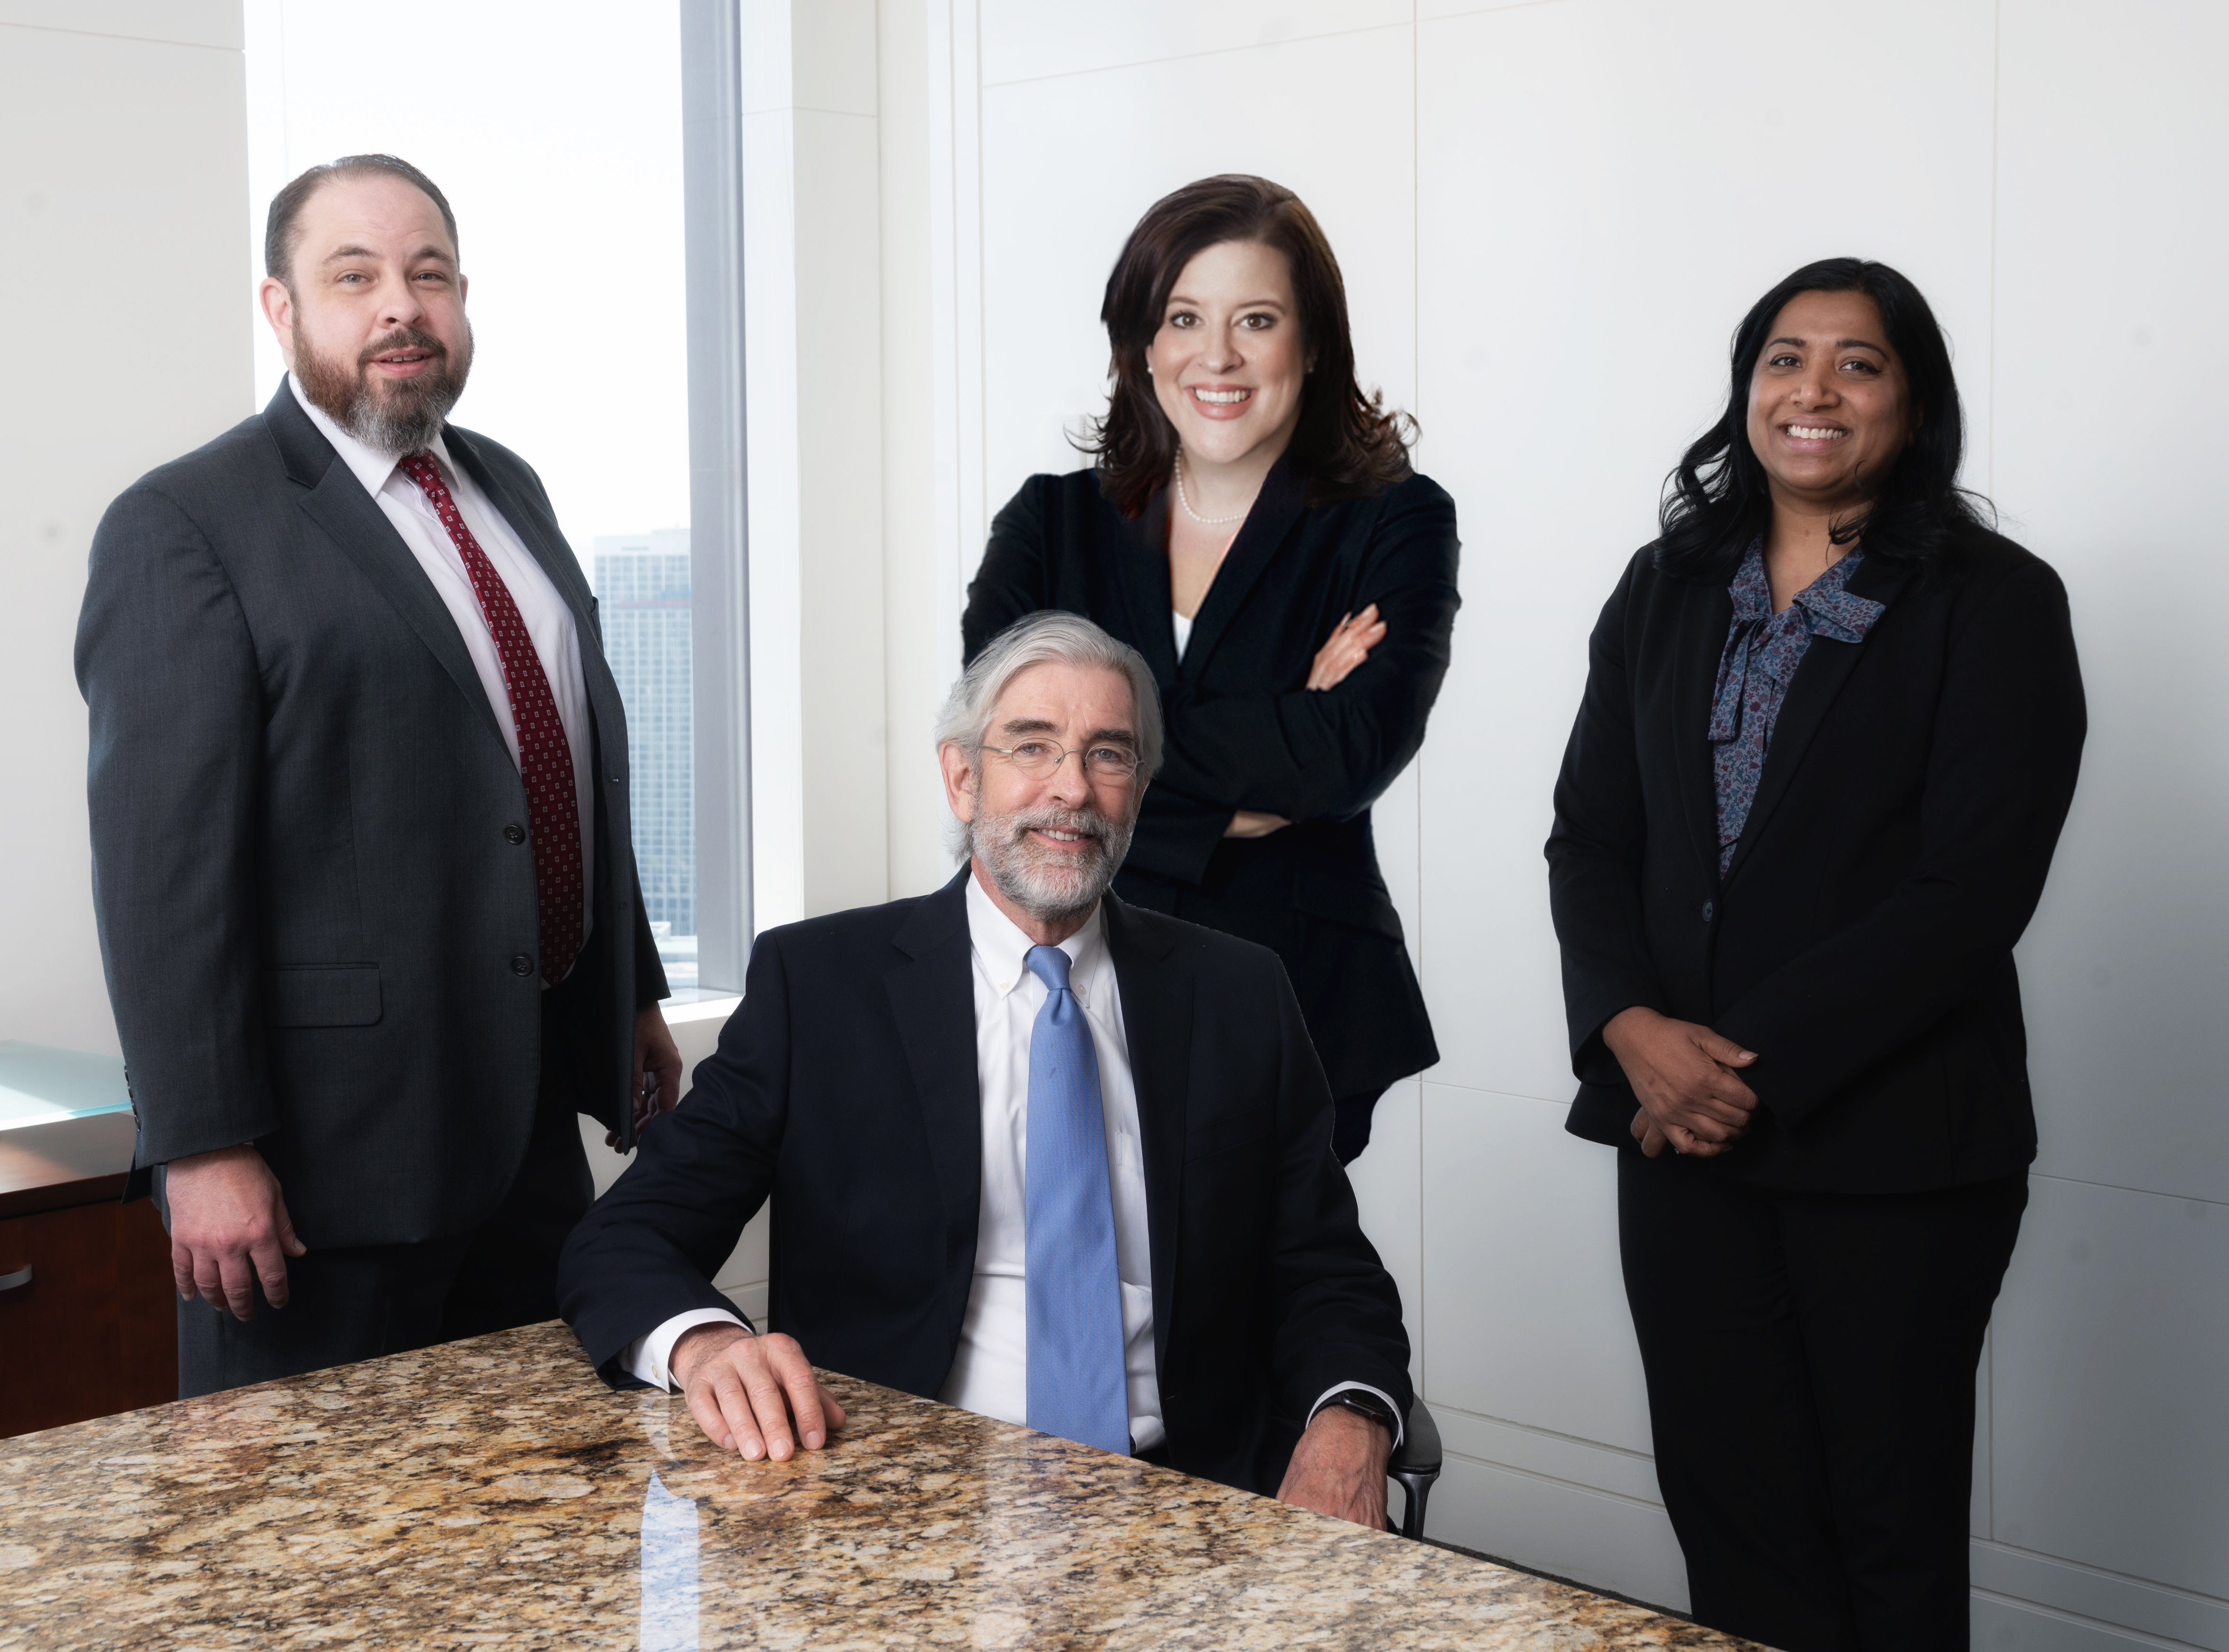 Ed Buckley's New Civil Rights and Employment Law Firm Is Open for Business